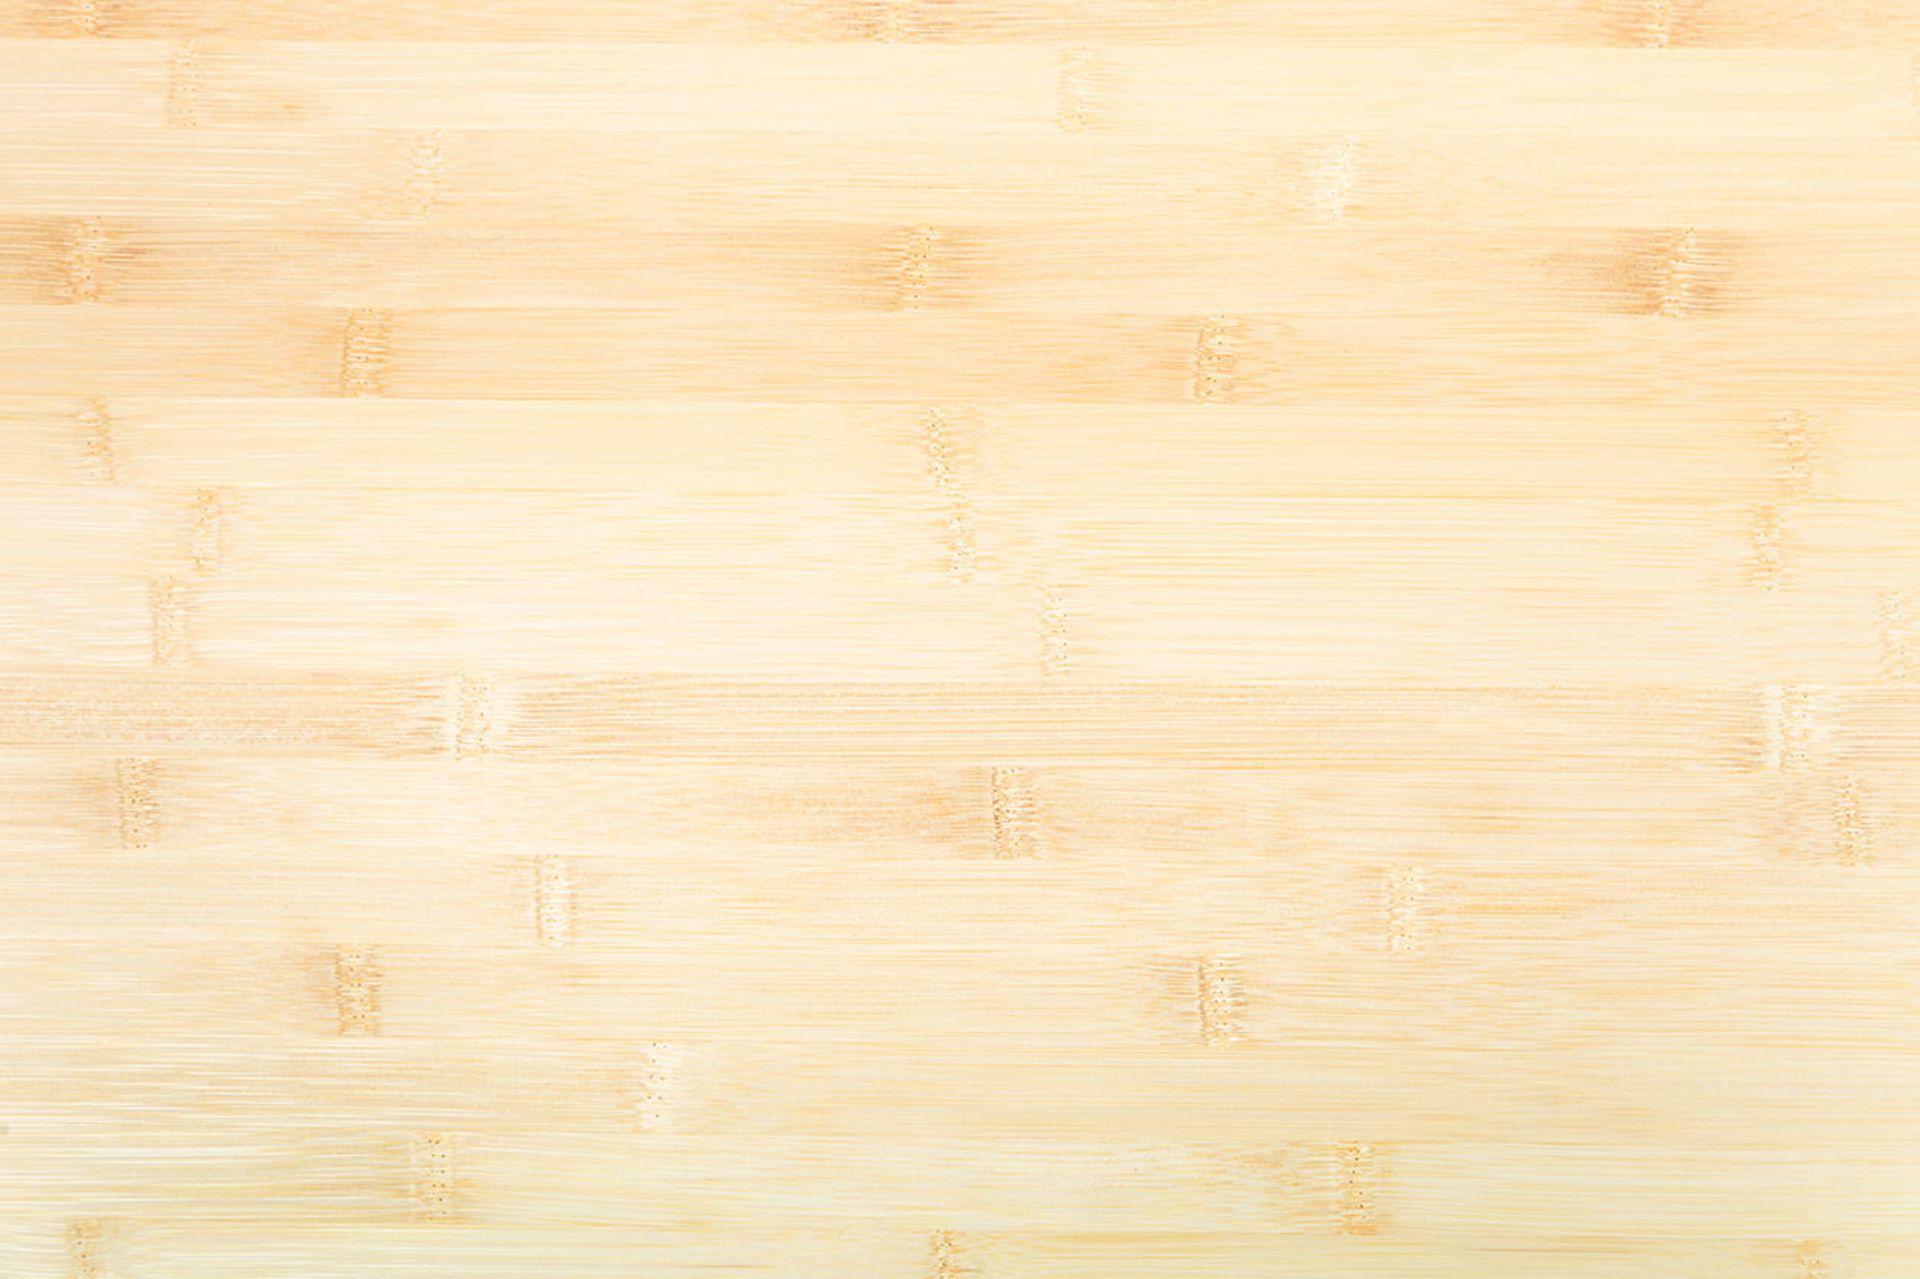 1 x Layered Solid Bamboo Wood Kitchen Worktop - Size: 3000 x 650 x 40mm - Ideal For Kitchens, - Image 2 of 4